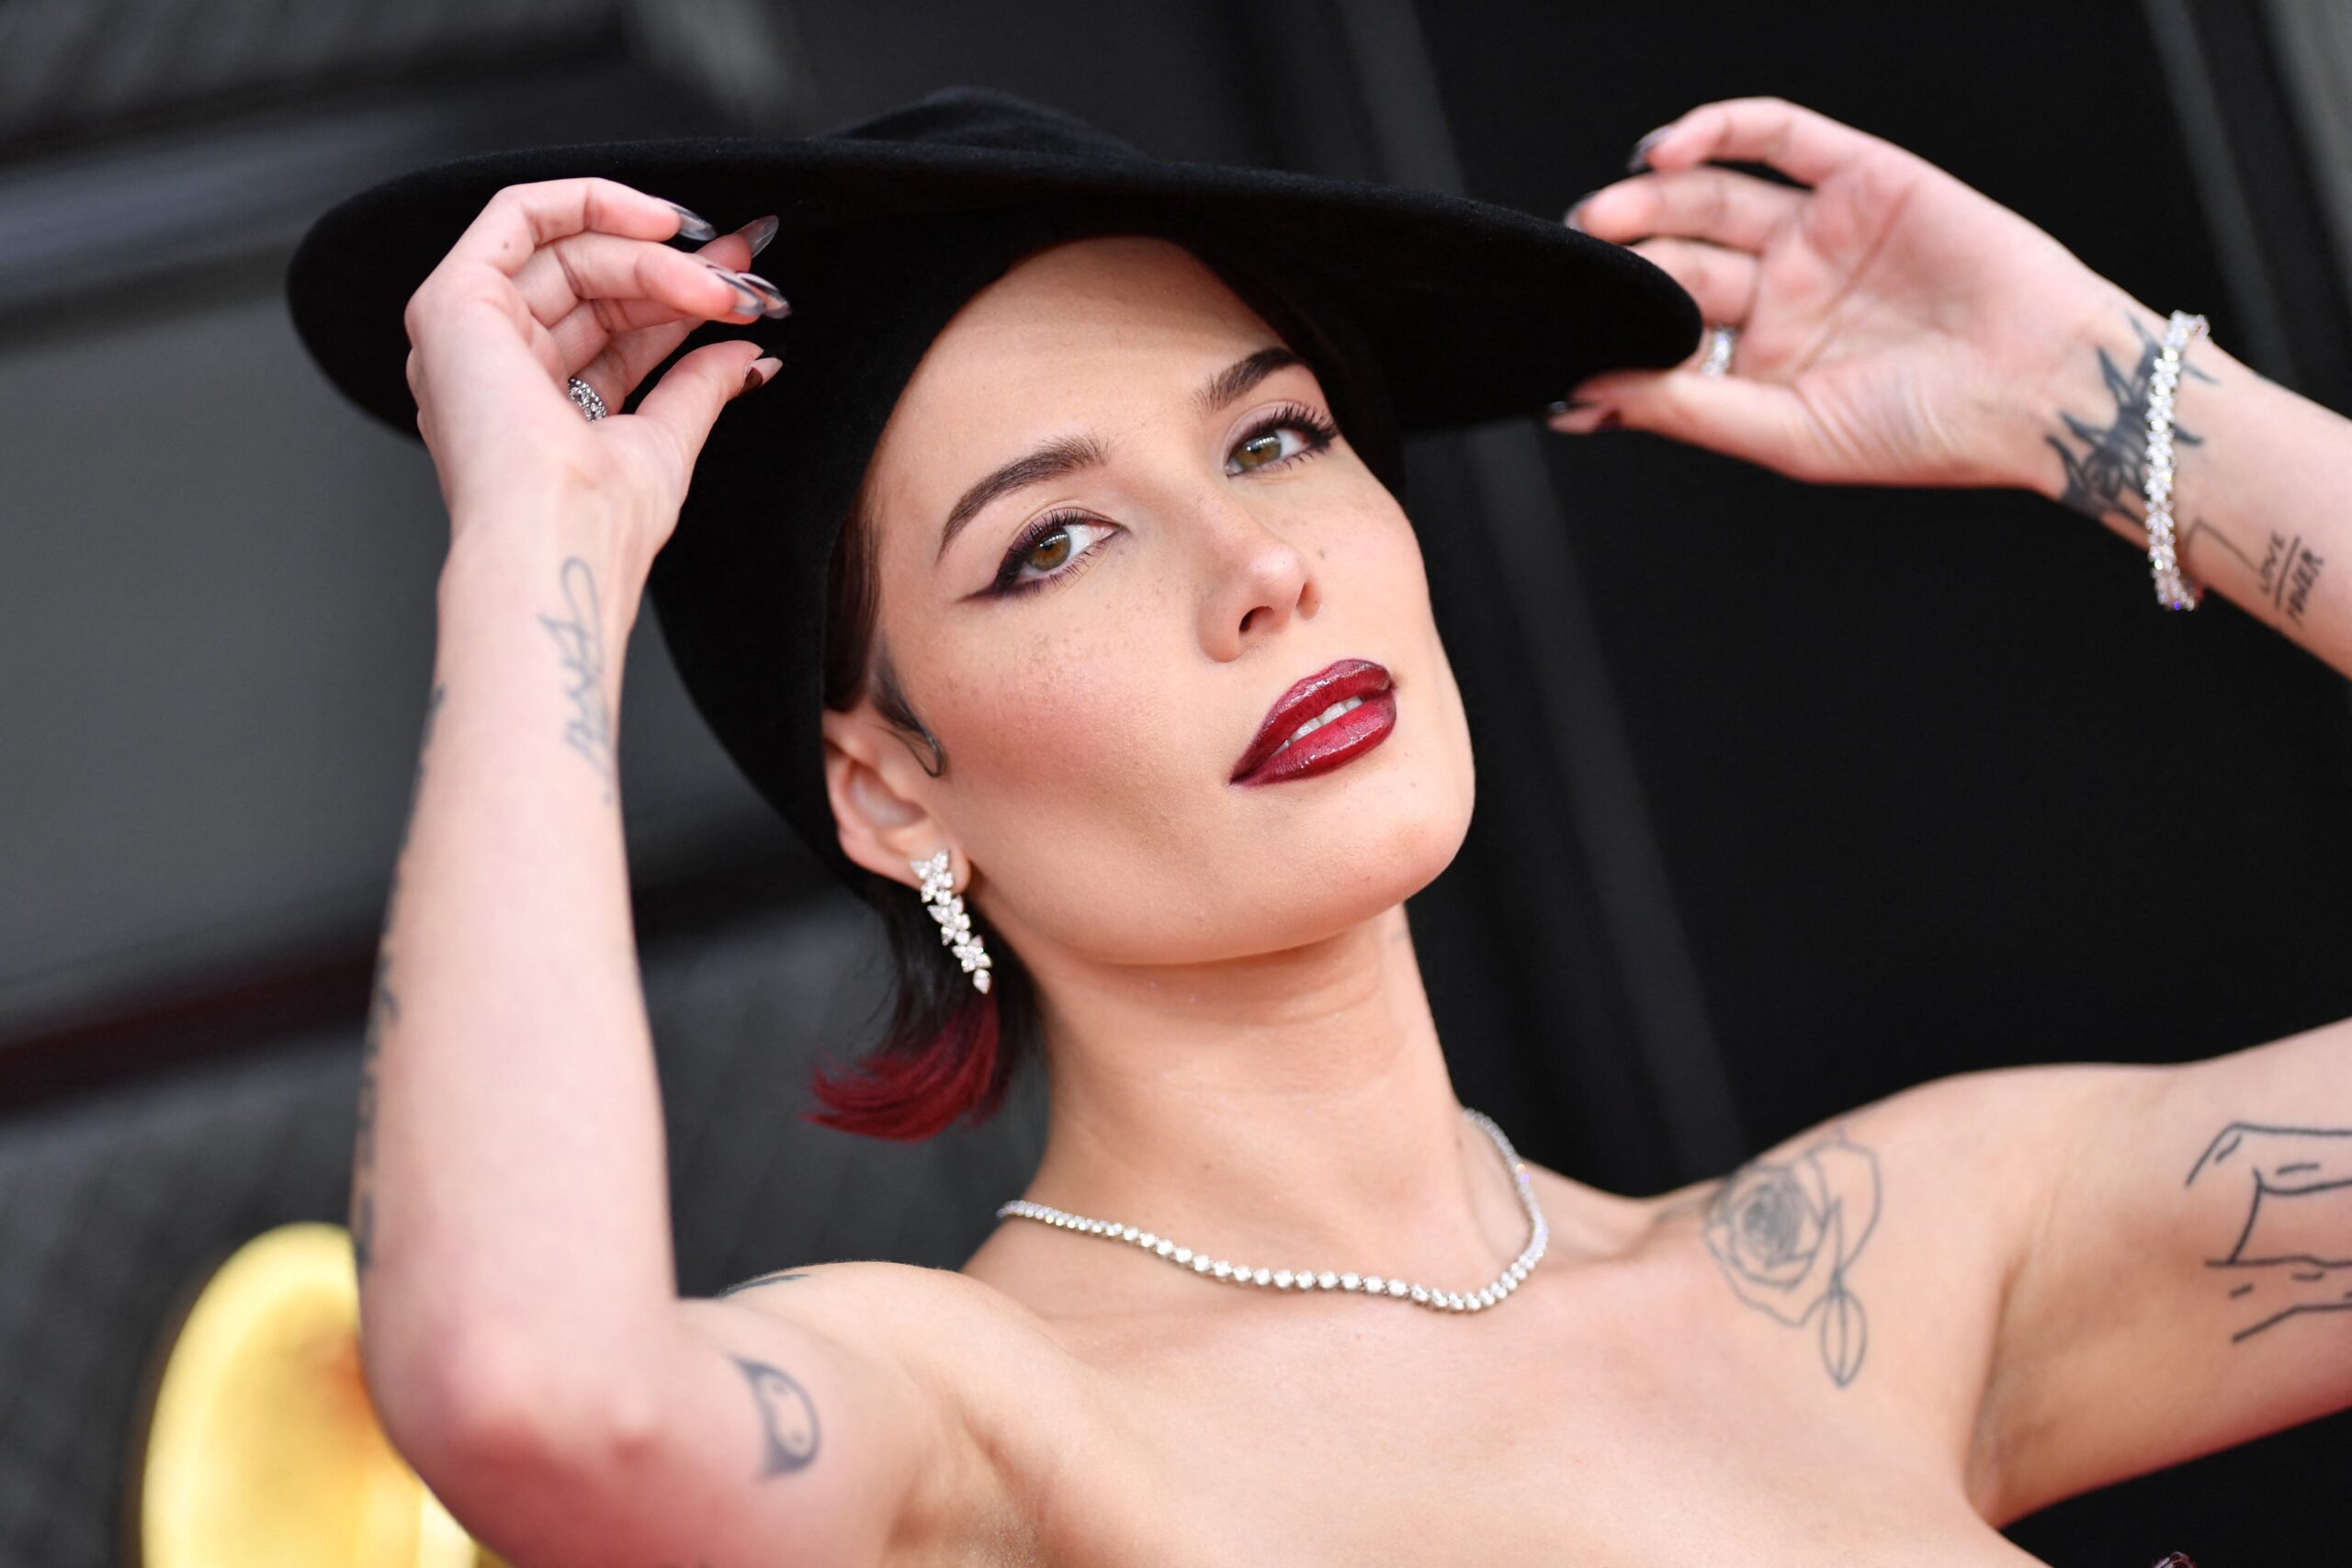 Watch Halsey Cover Kate Bush's 'Running Up That Hill' at Gov Ball